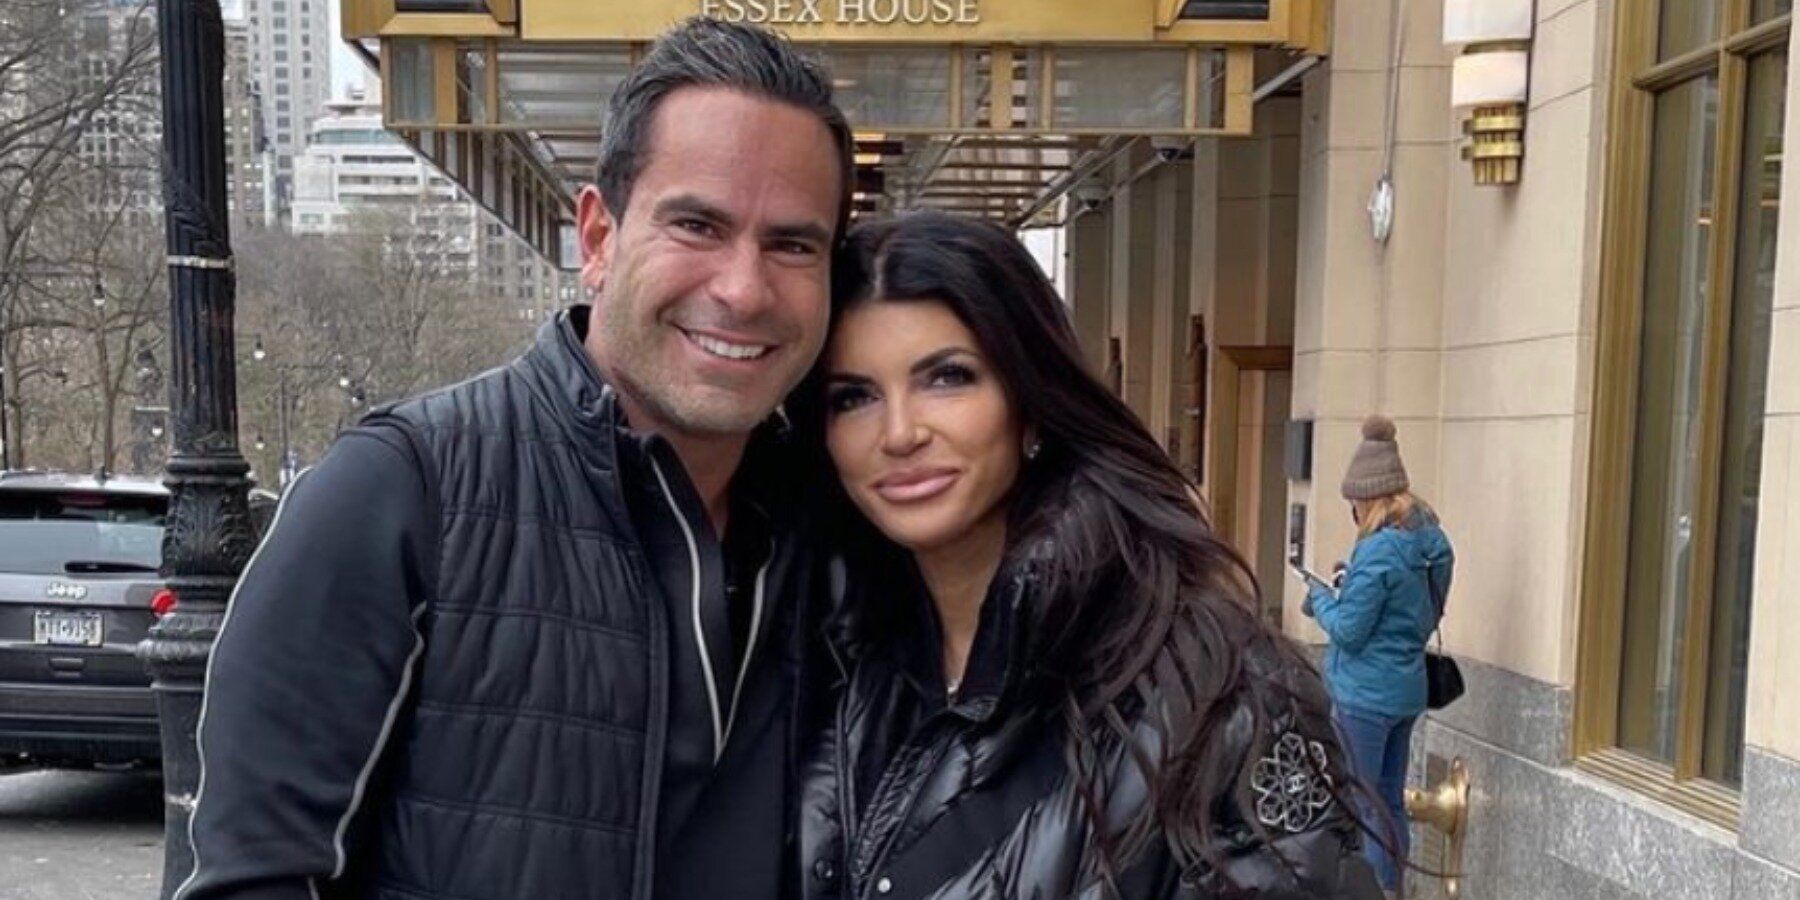 Real Housewives of New Jersey's Teresa Giudice and Luis Ruelas on the sidewalk